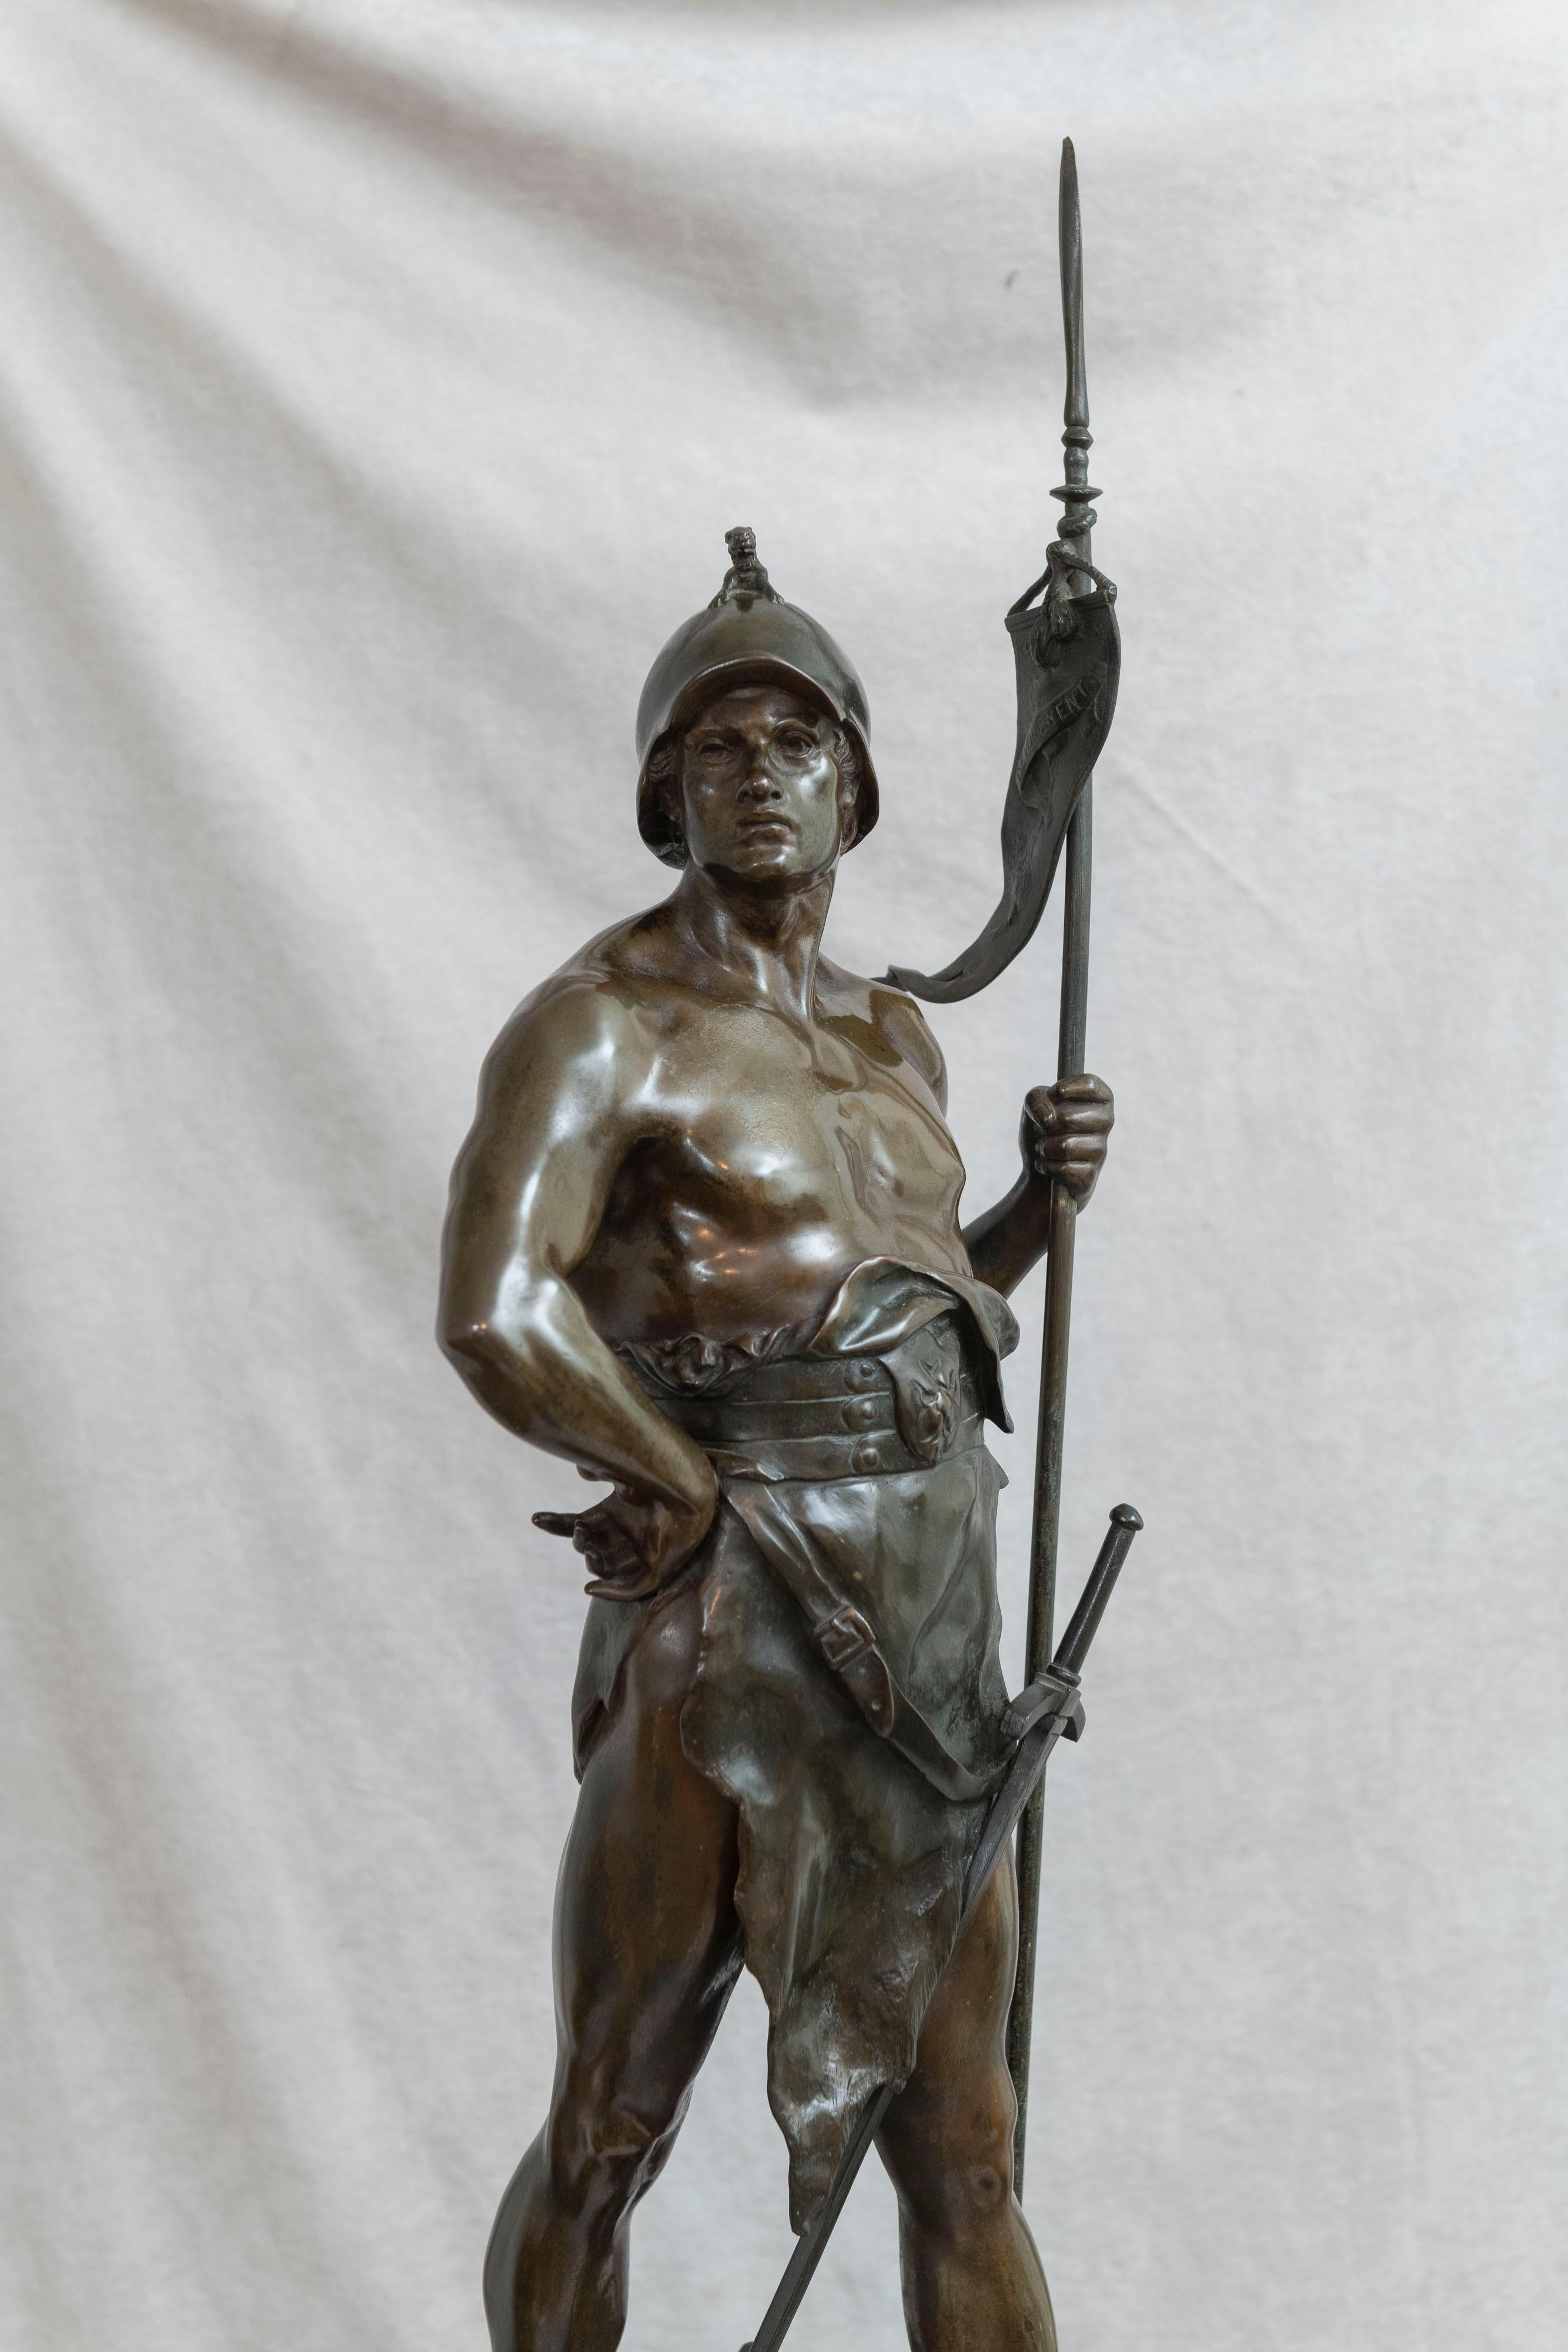 This impressive masculine warrior is signed by the well regarded, and prolific artist, Emile Picault (1833-1915). It also bears the plaque 